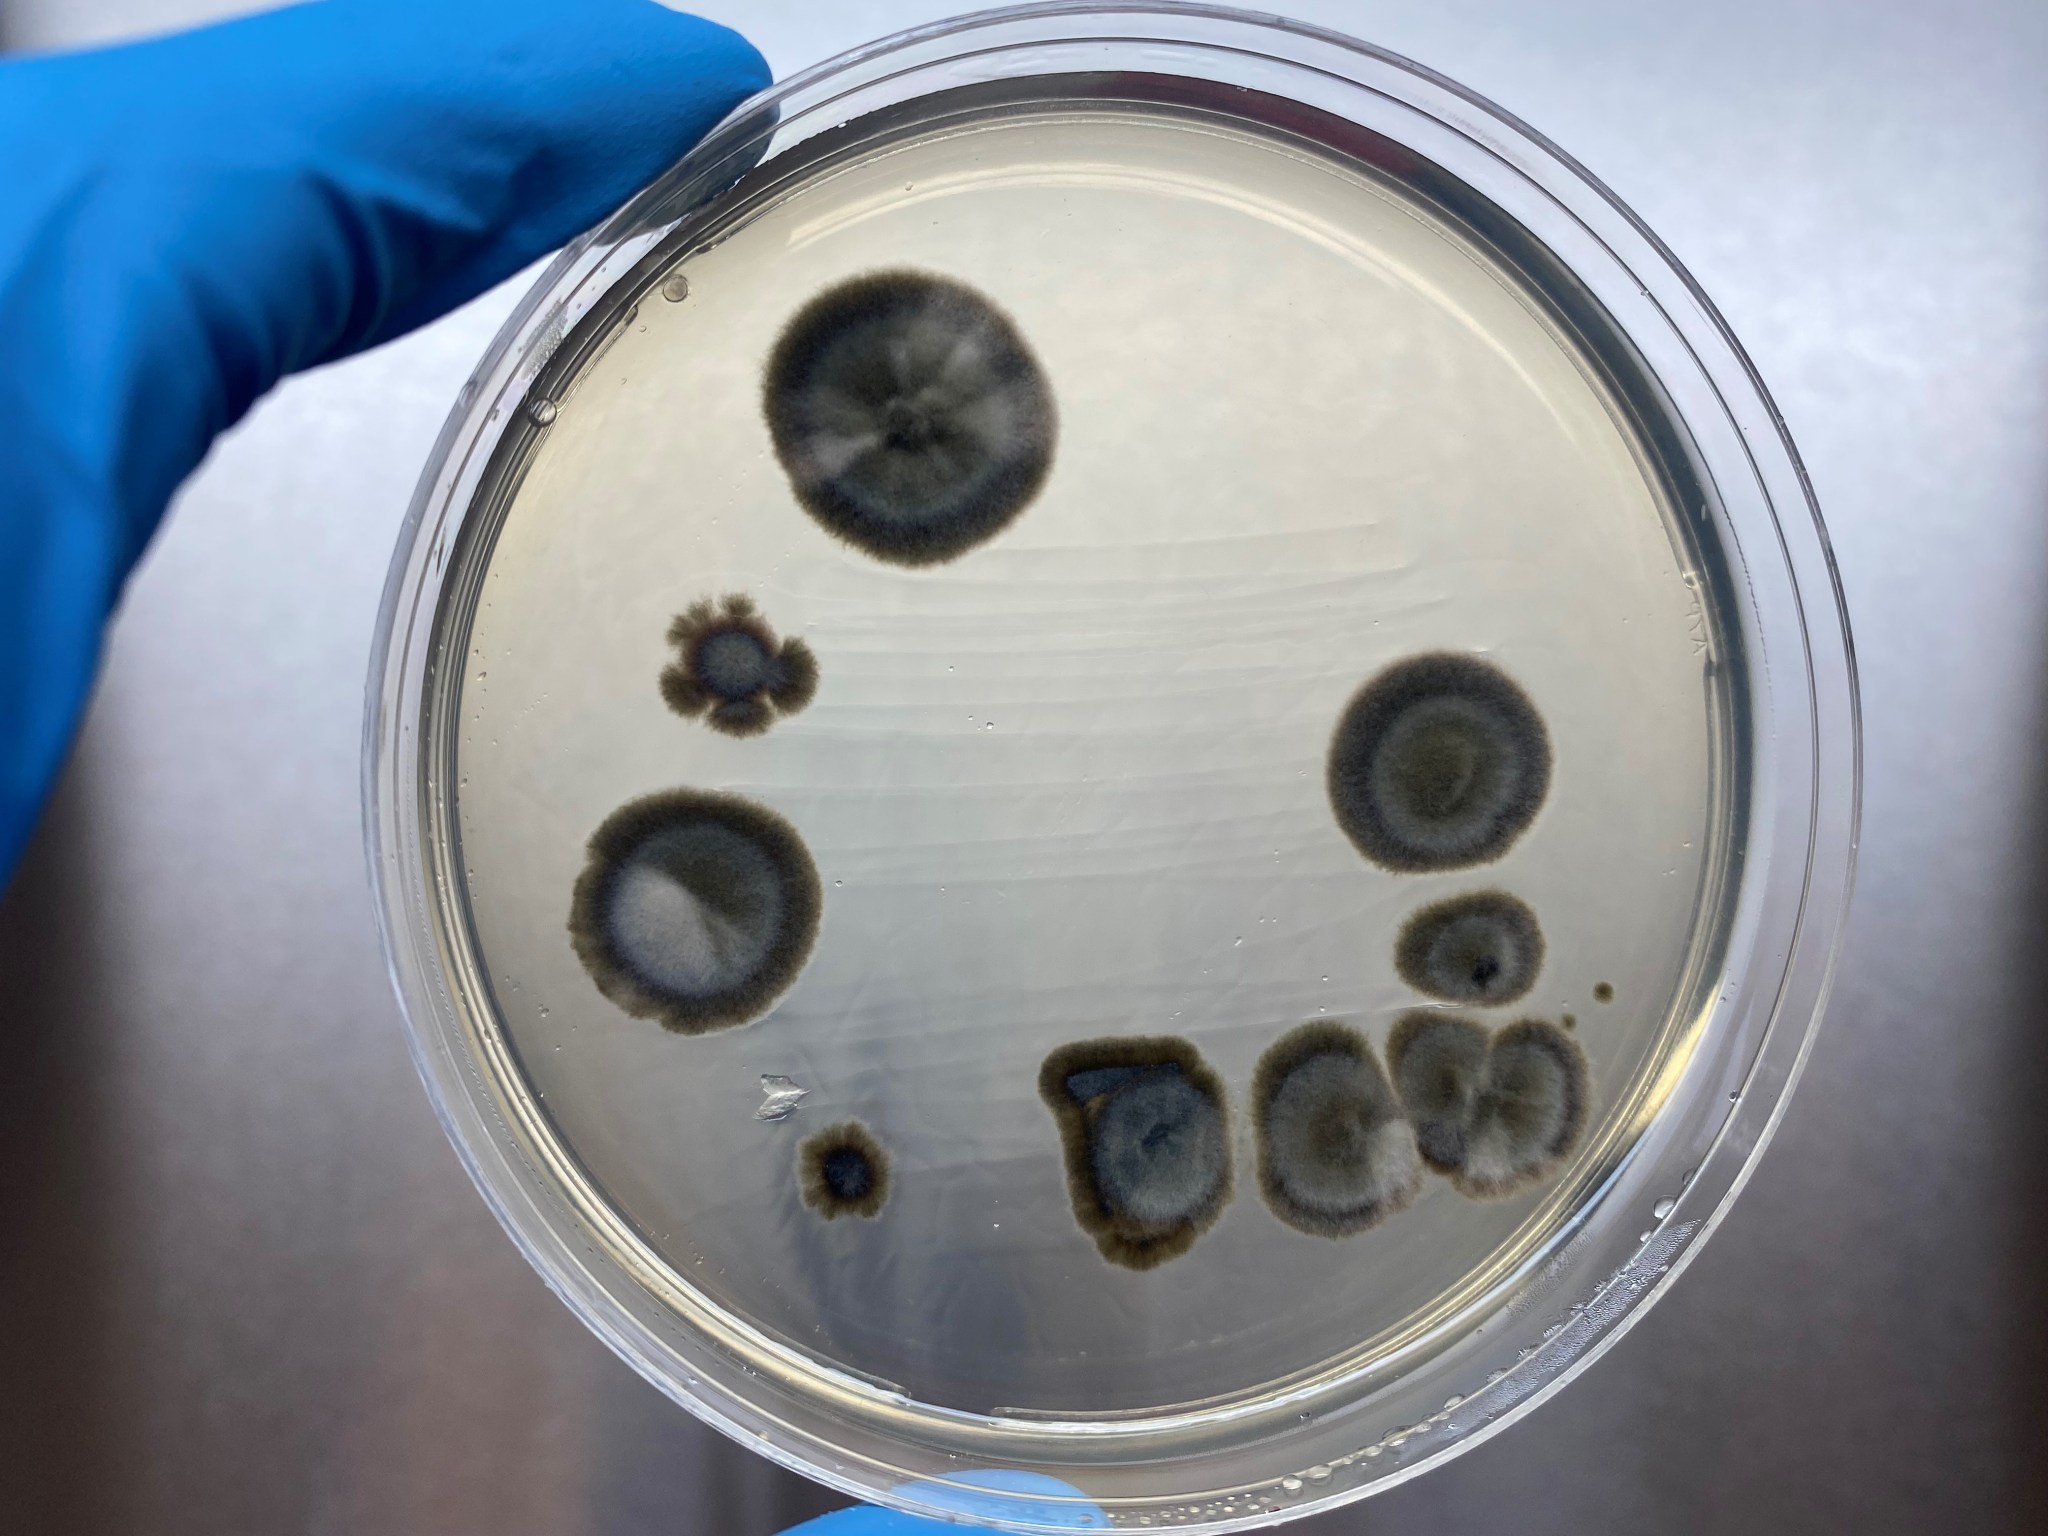 A Petri dish held by a gloved hand hosts several black circular spots of varying sizes and one flower shaped spot.